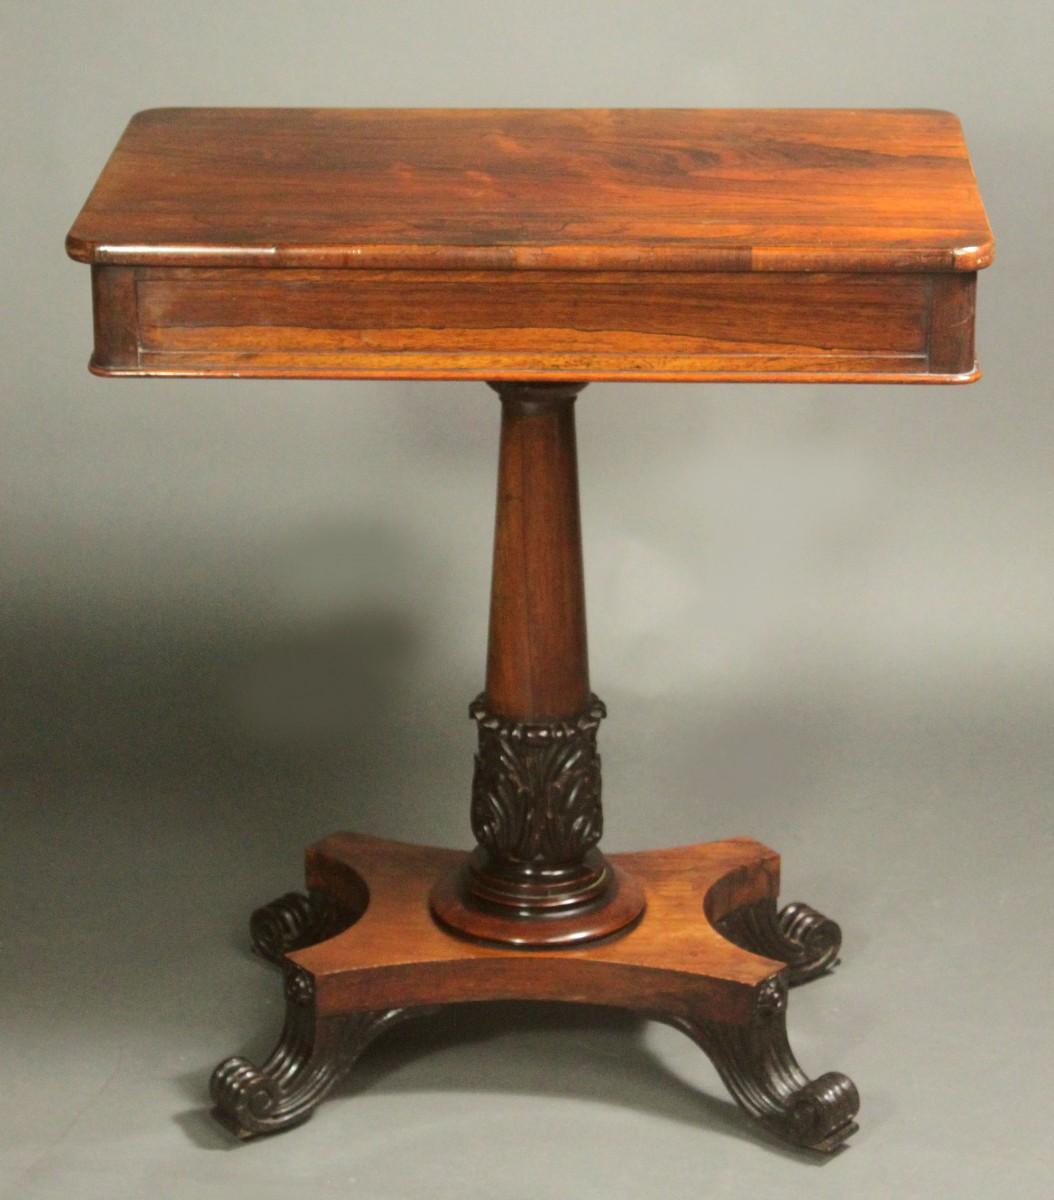 Regency Rosewood Occasional Table In Good Condition For Sale In Bradford-on-Avon, Wiltshire